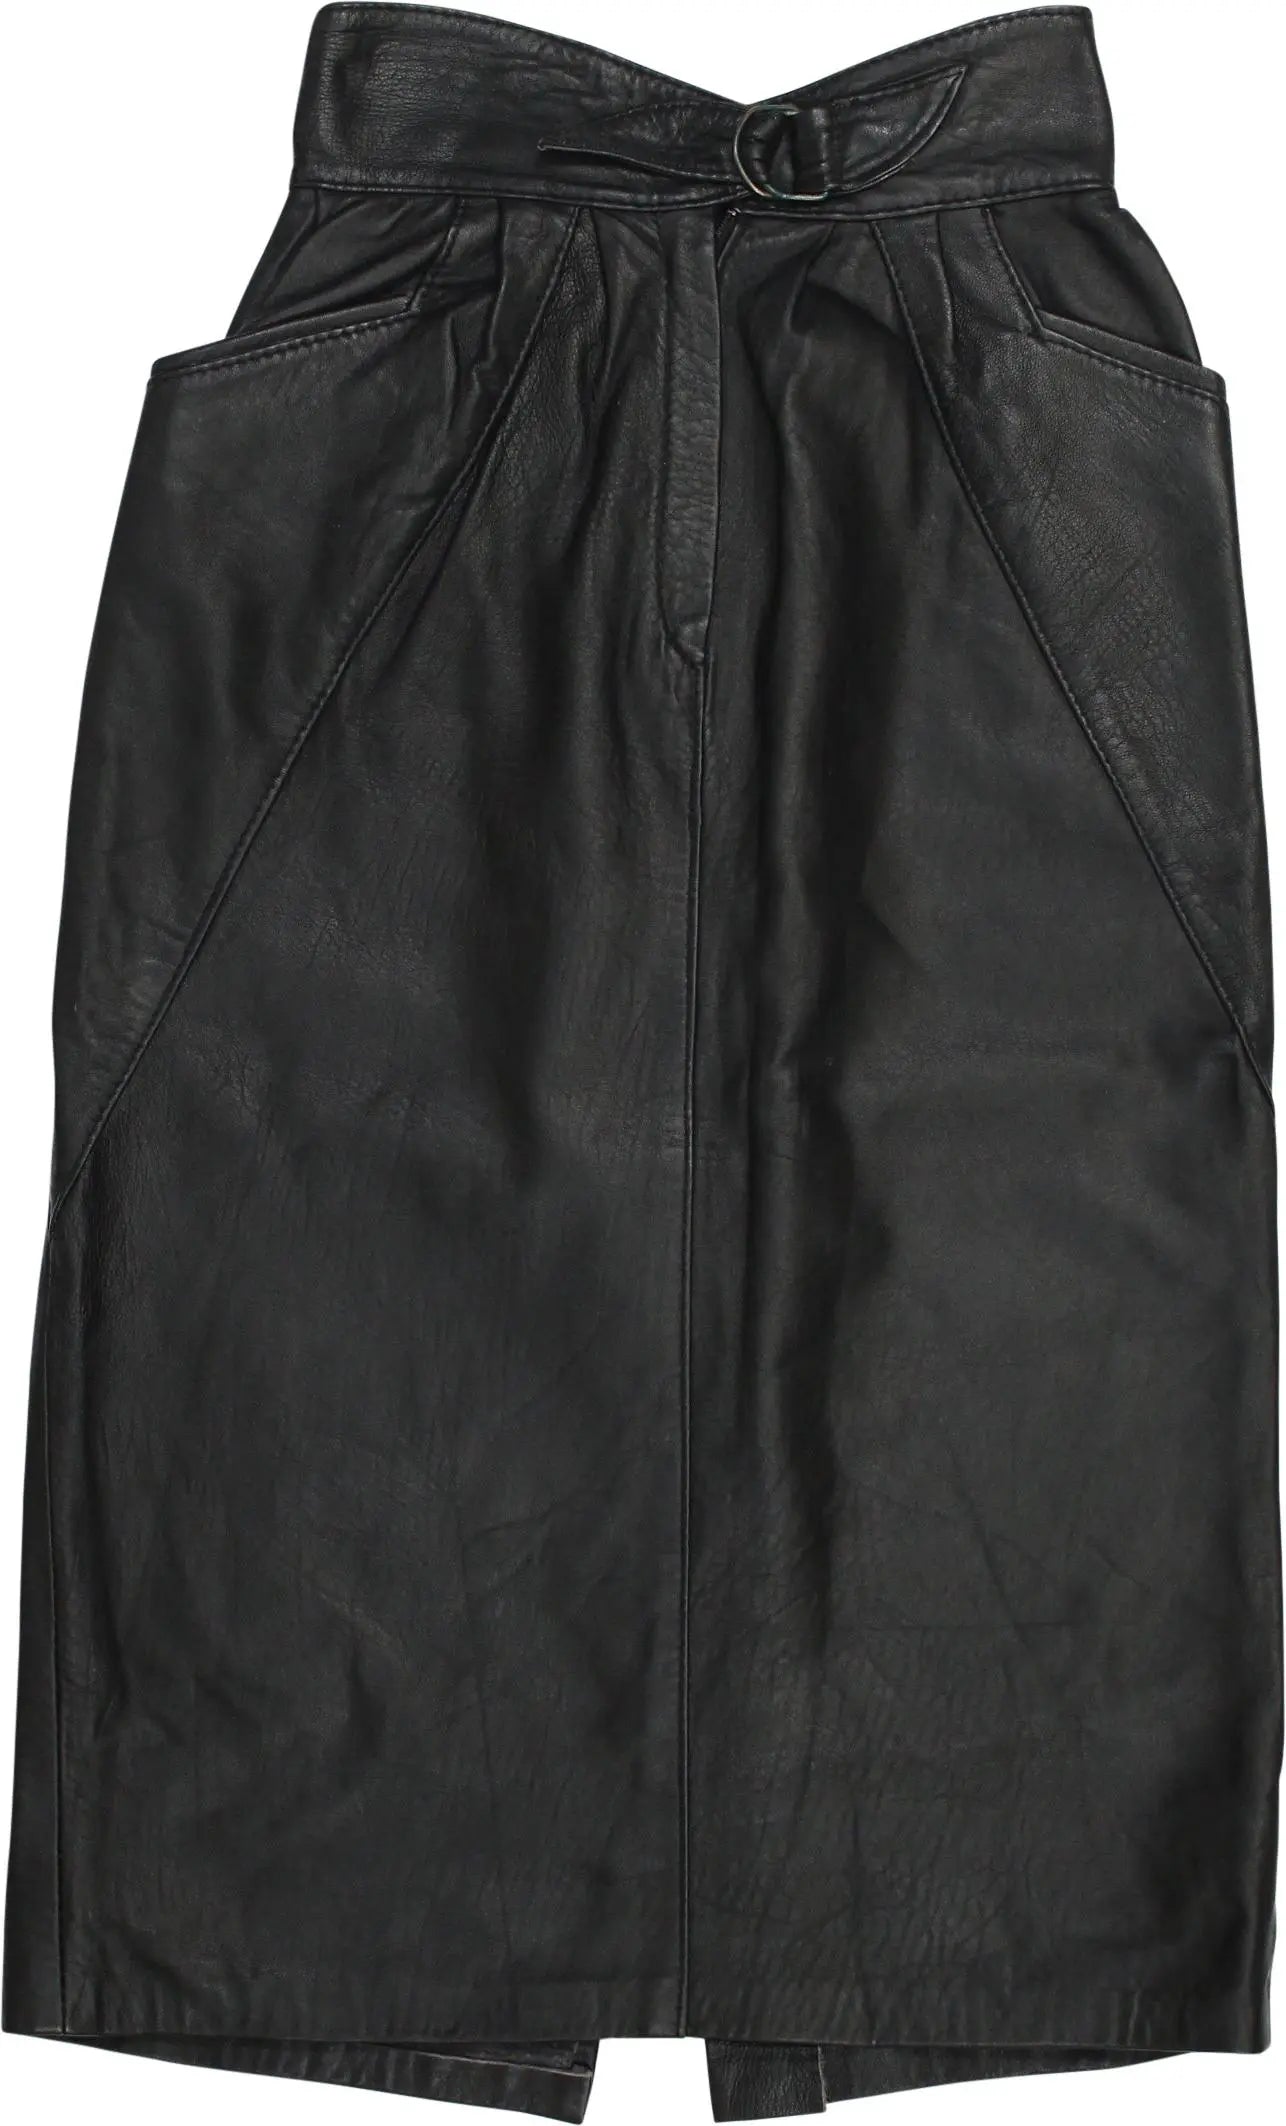 Unknown - Black Leather Skirt- ThriftTale.com - Vintage and second handclothing